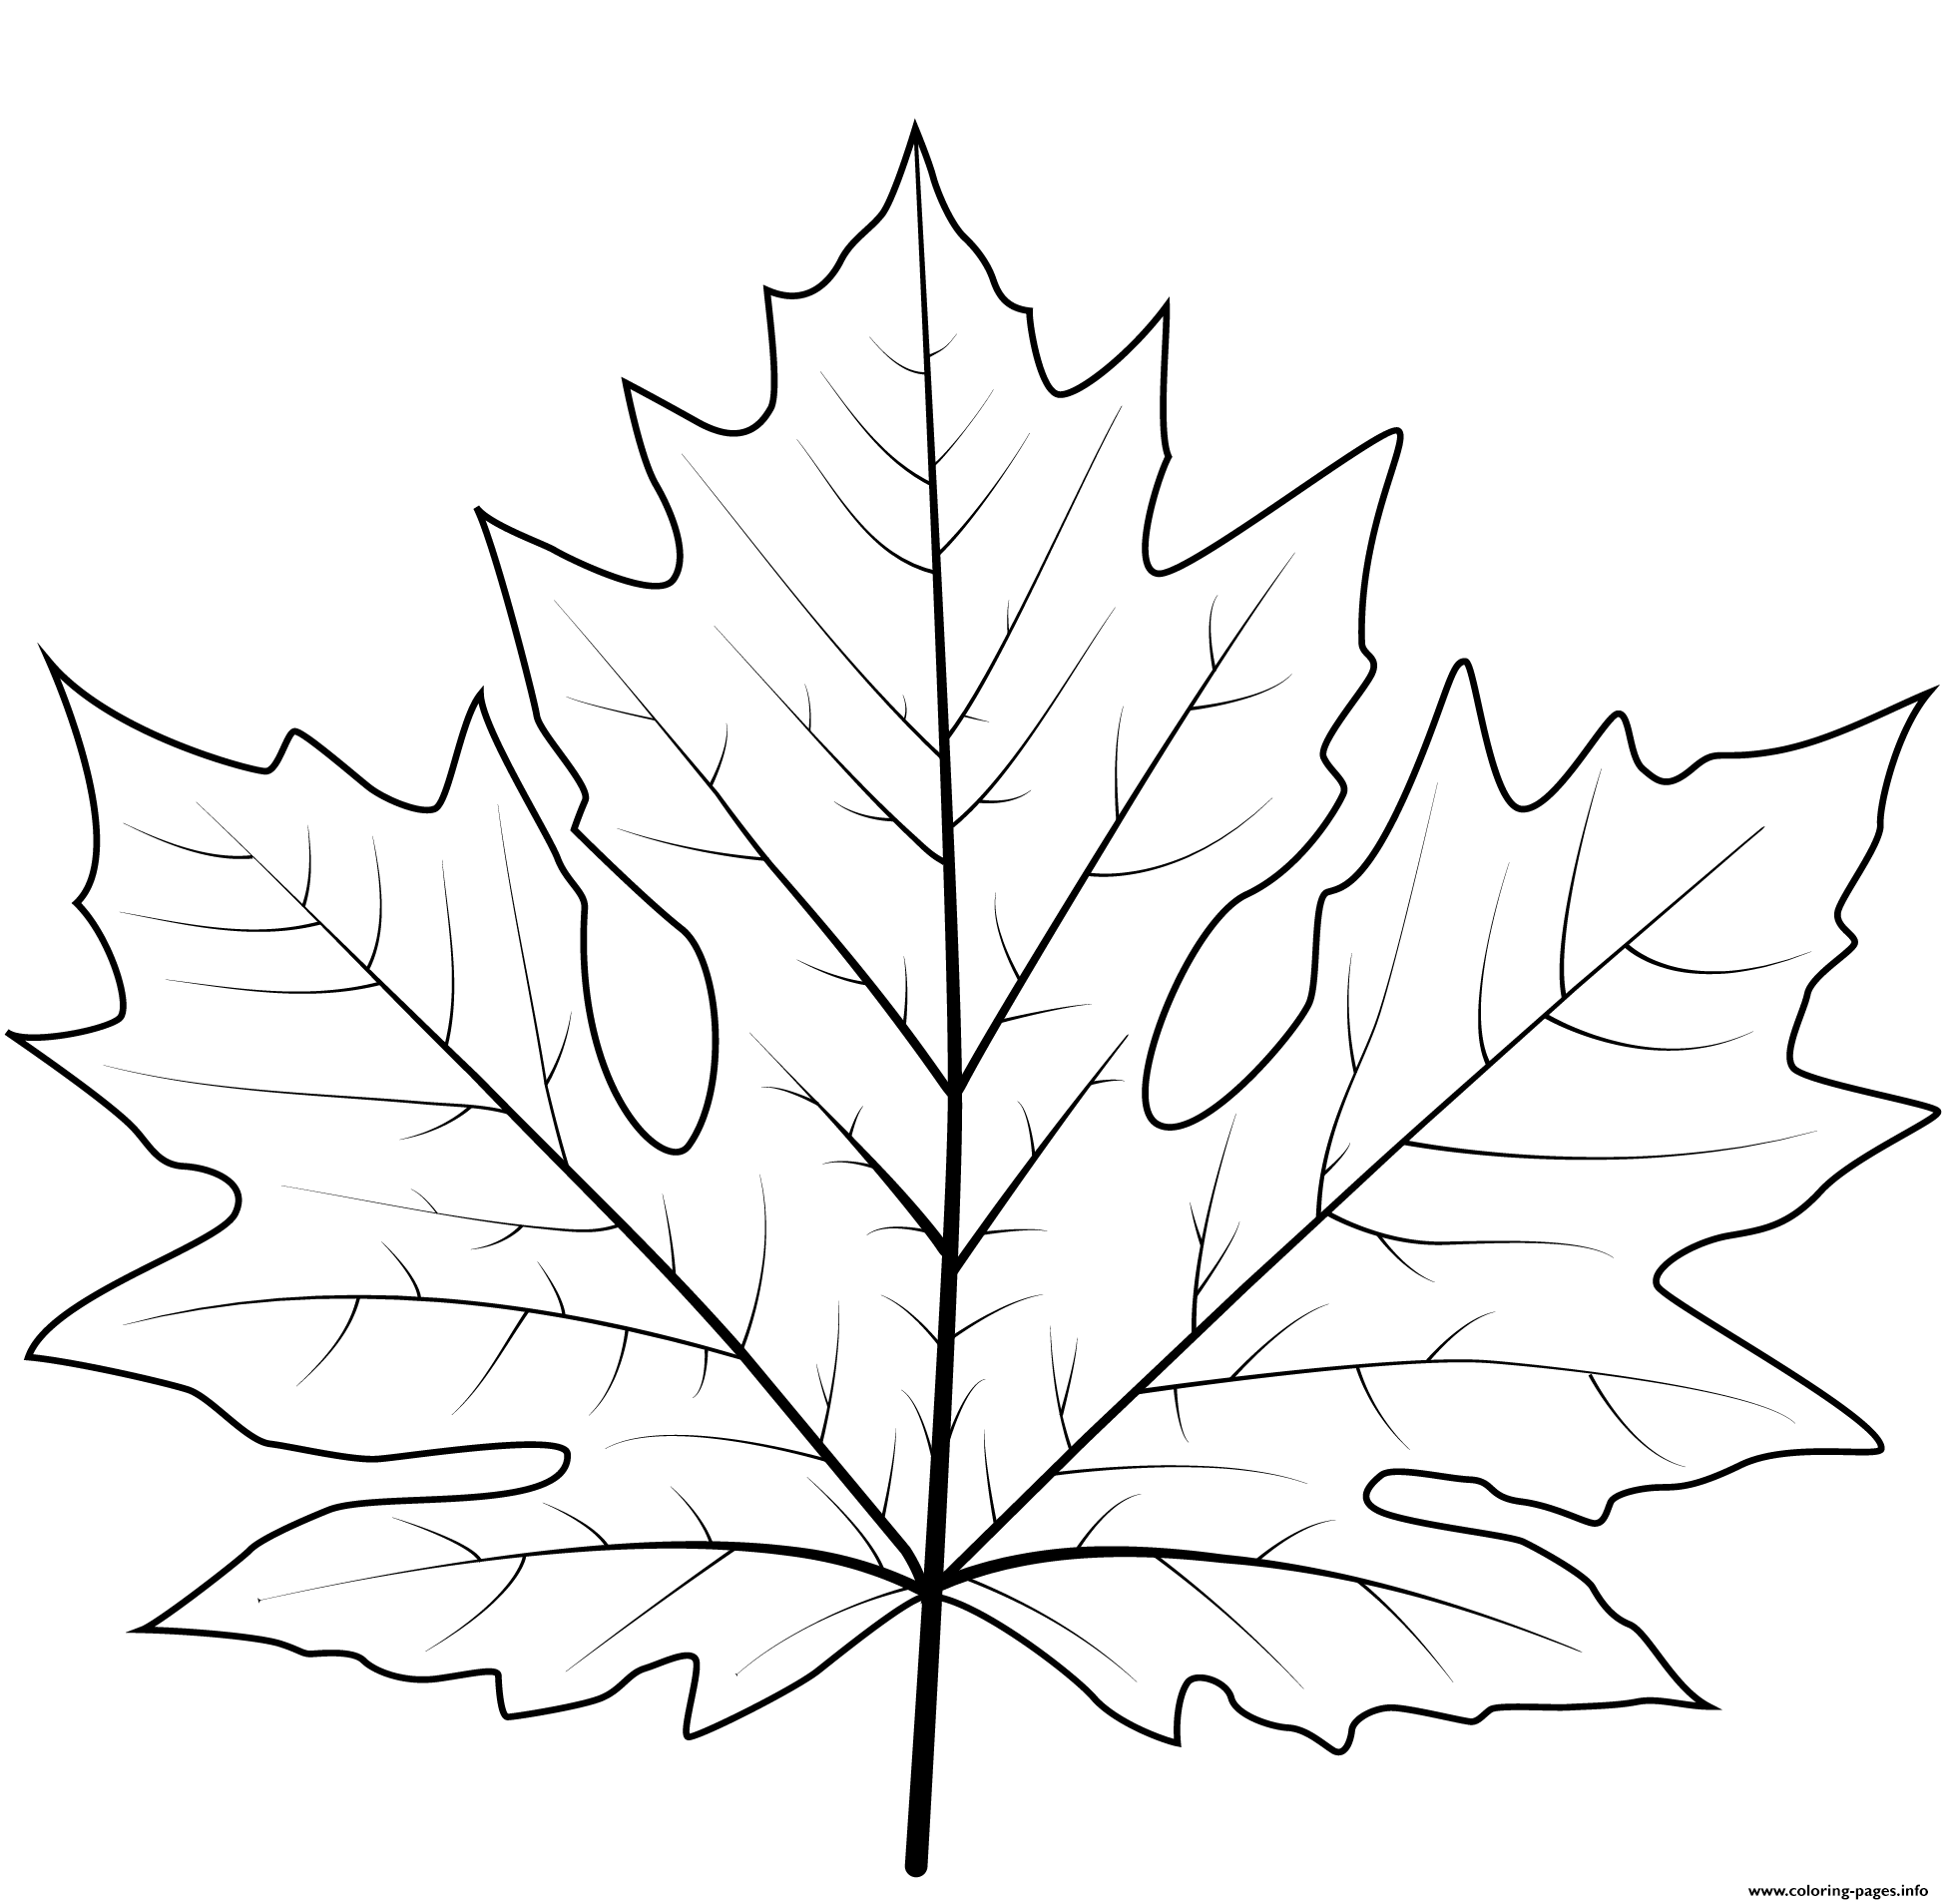 big-leaf-coloring-pages-free-download-goodimg-co